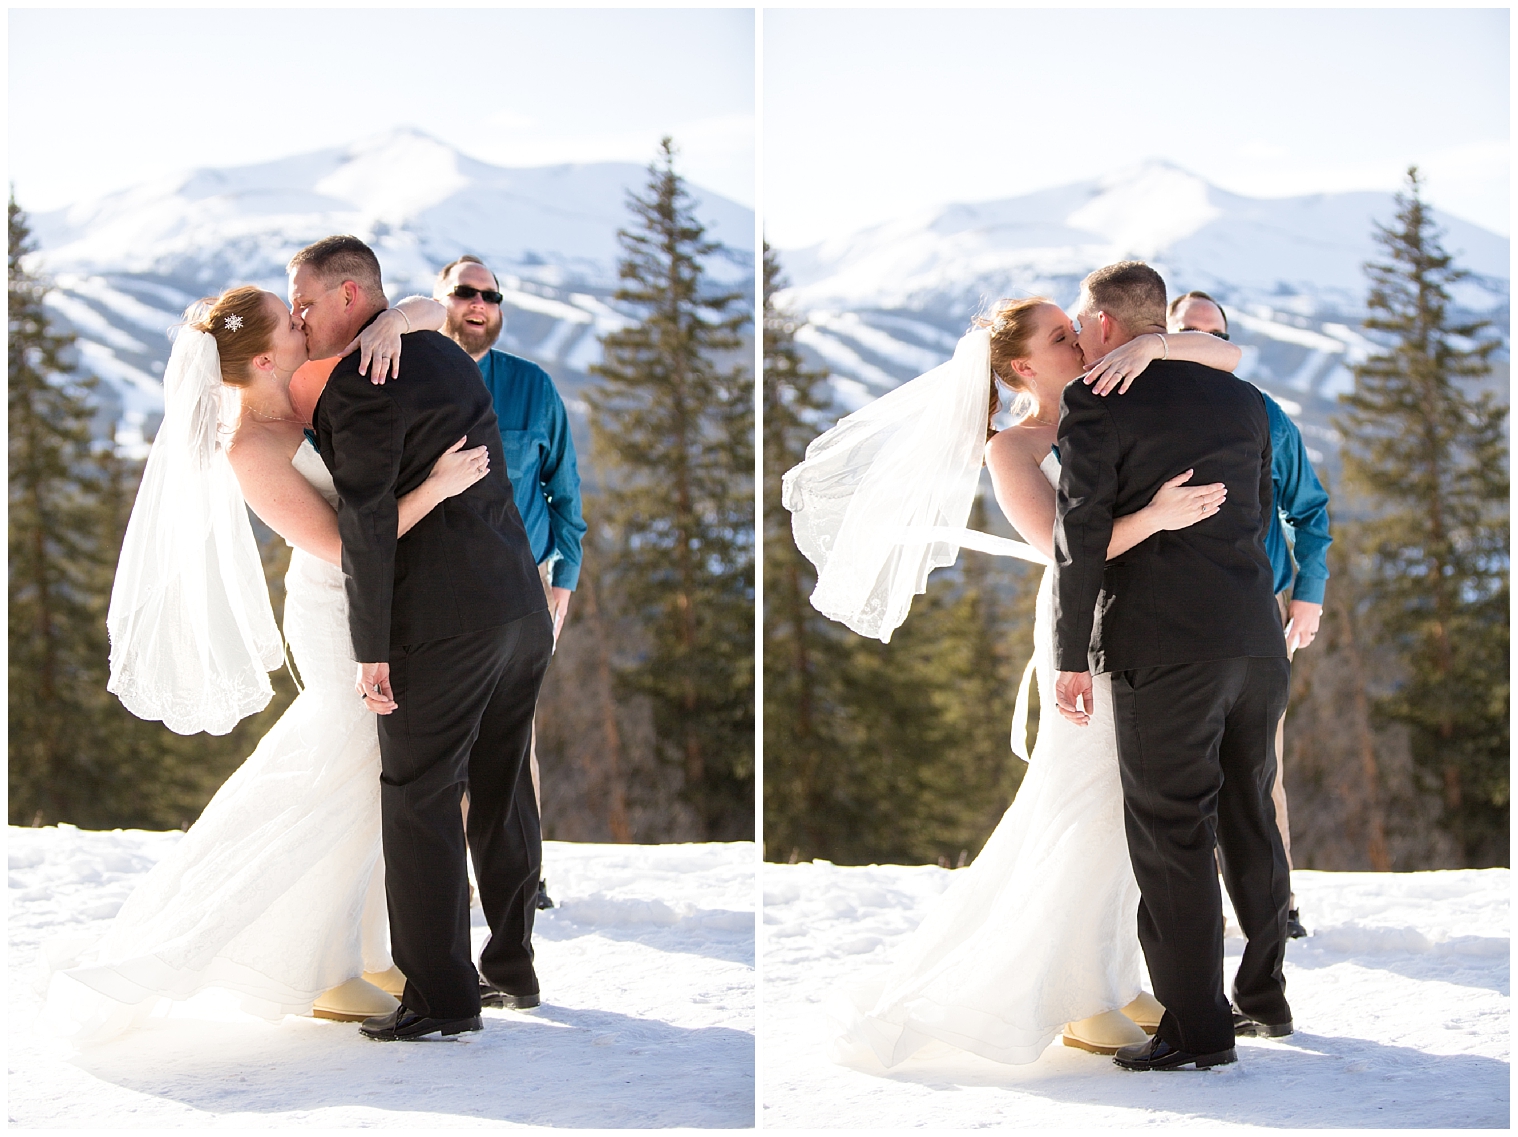 Bride and groom share their first kiss at their winter elopement in the mountains of Breckenridge elopement.